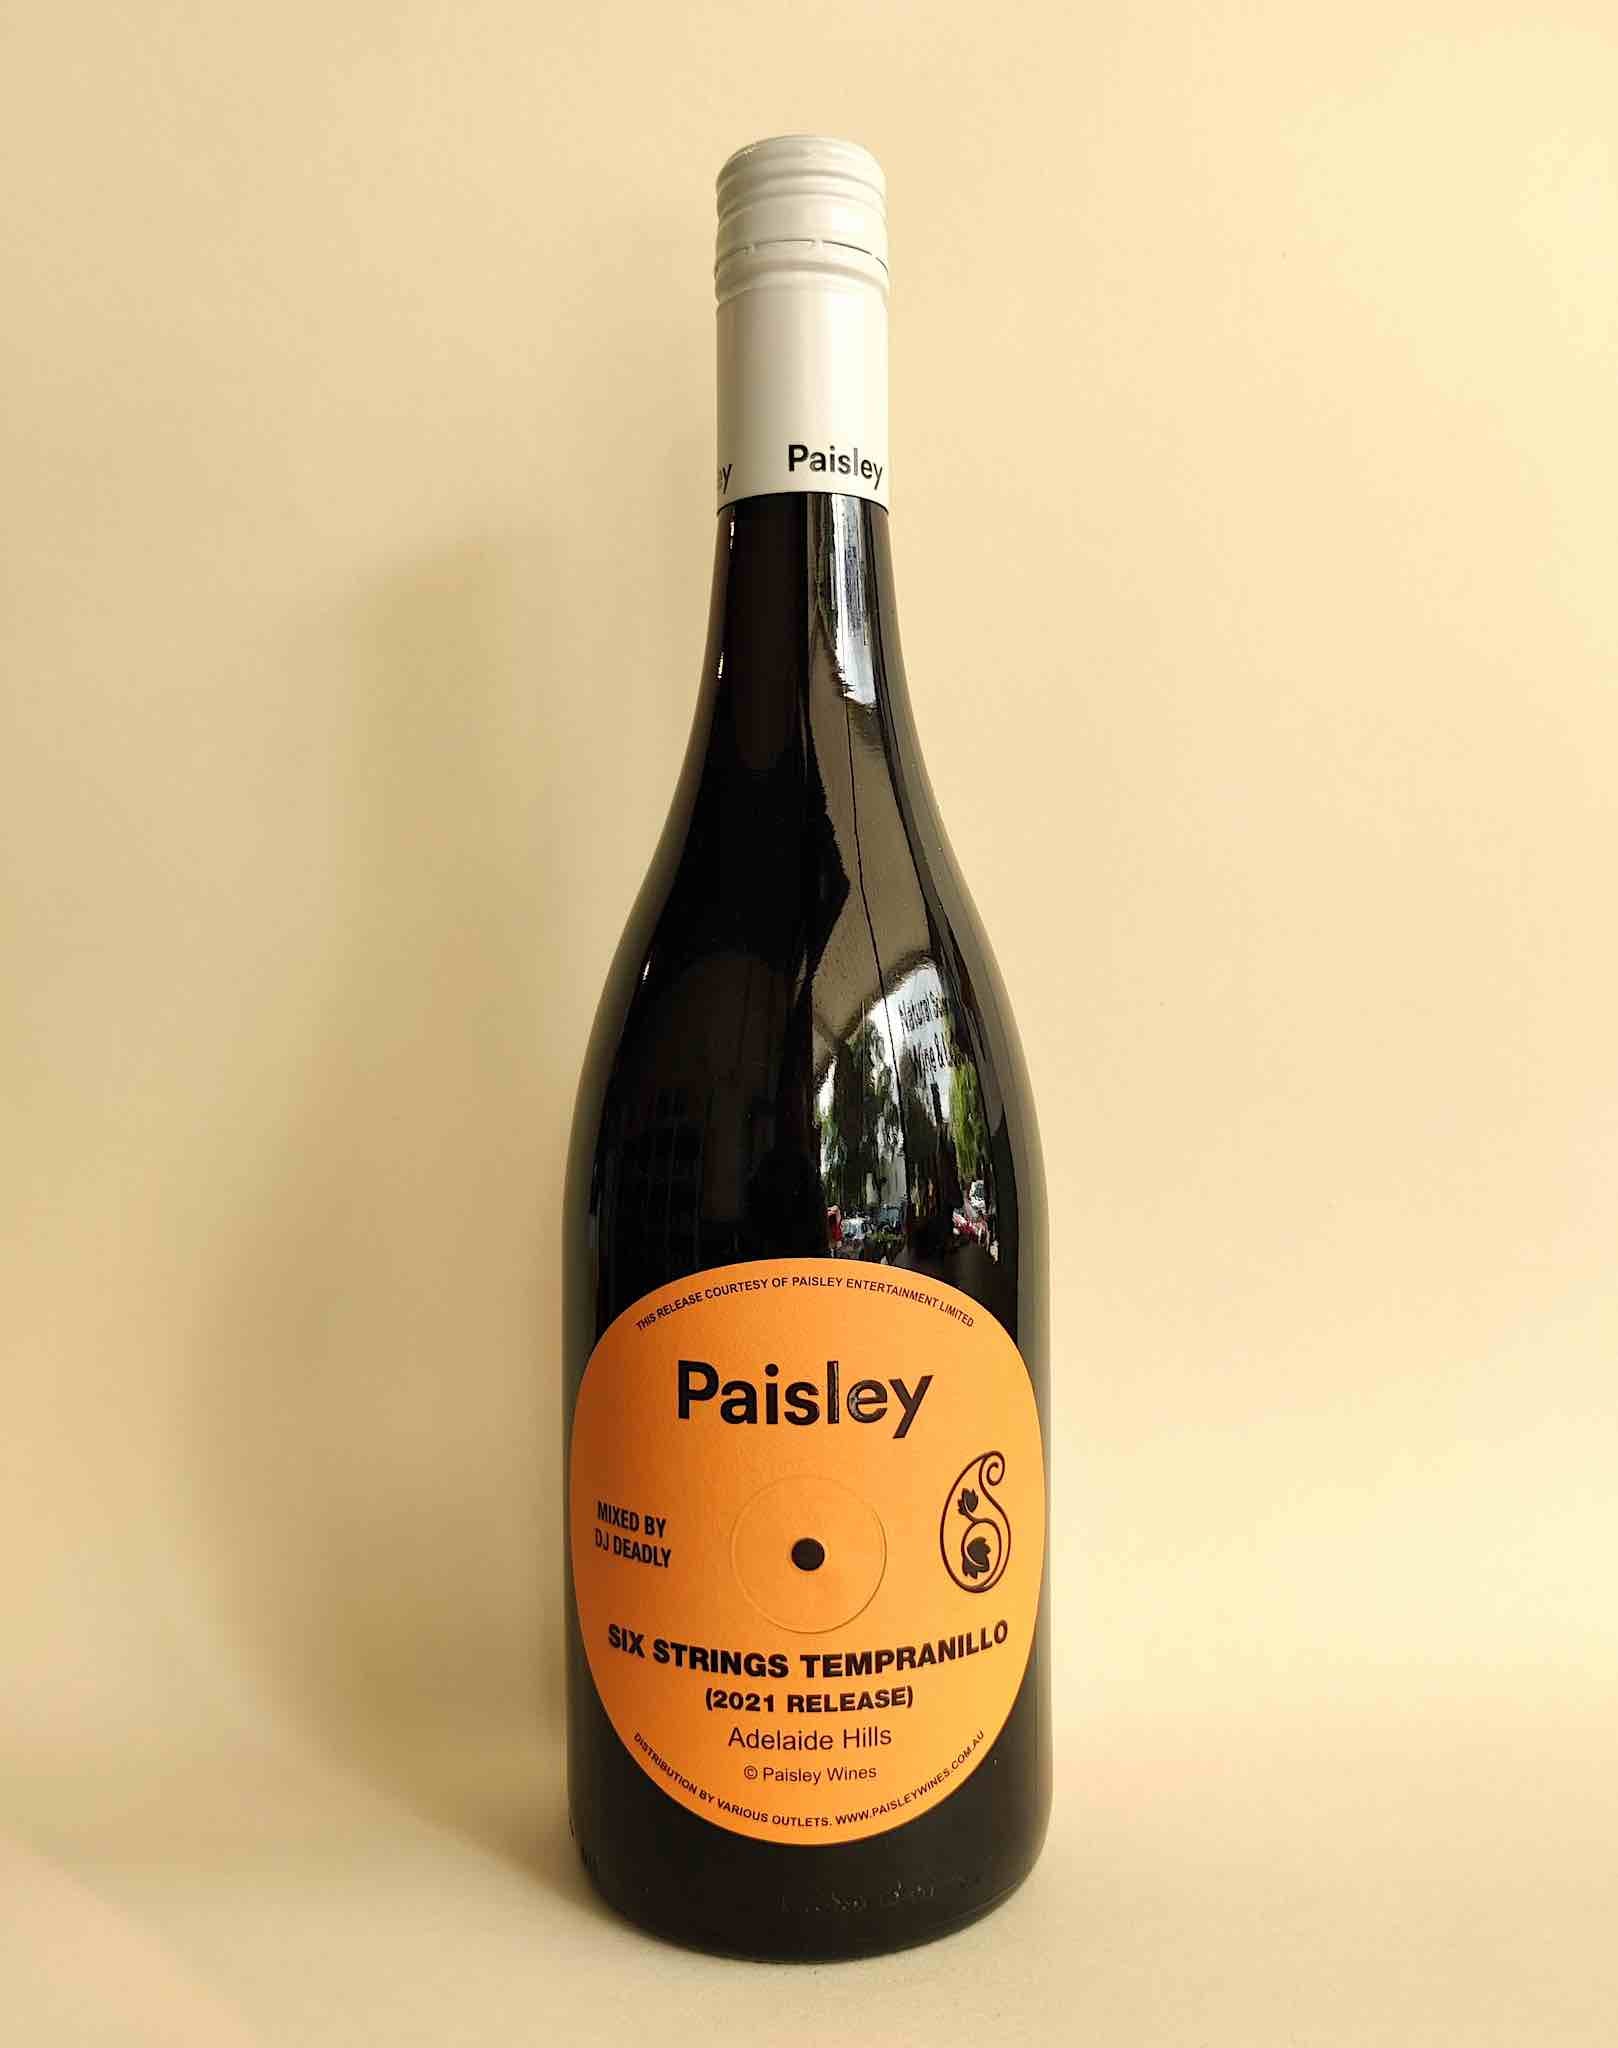 A bottle of Paisley Six Strings Tempranillo from Adelaide Hills, South Australia.